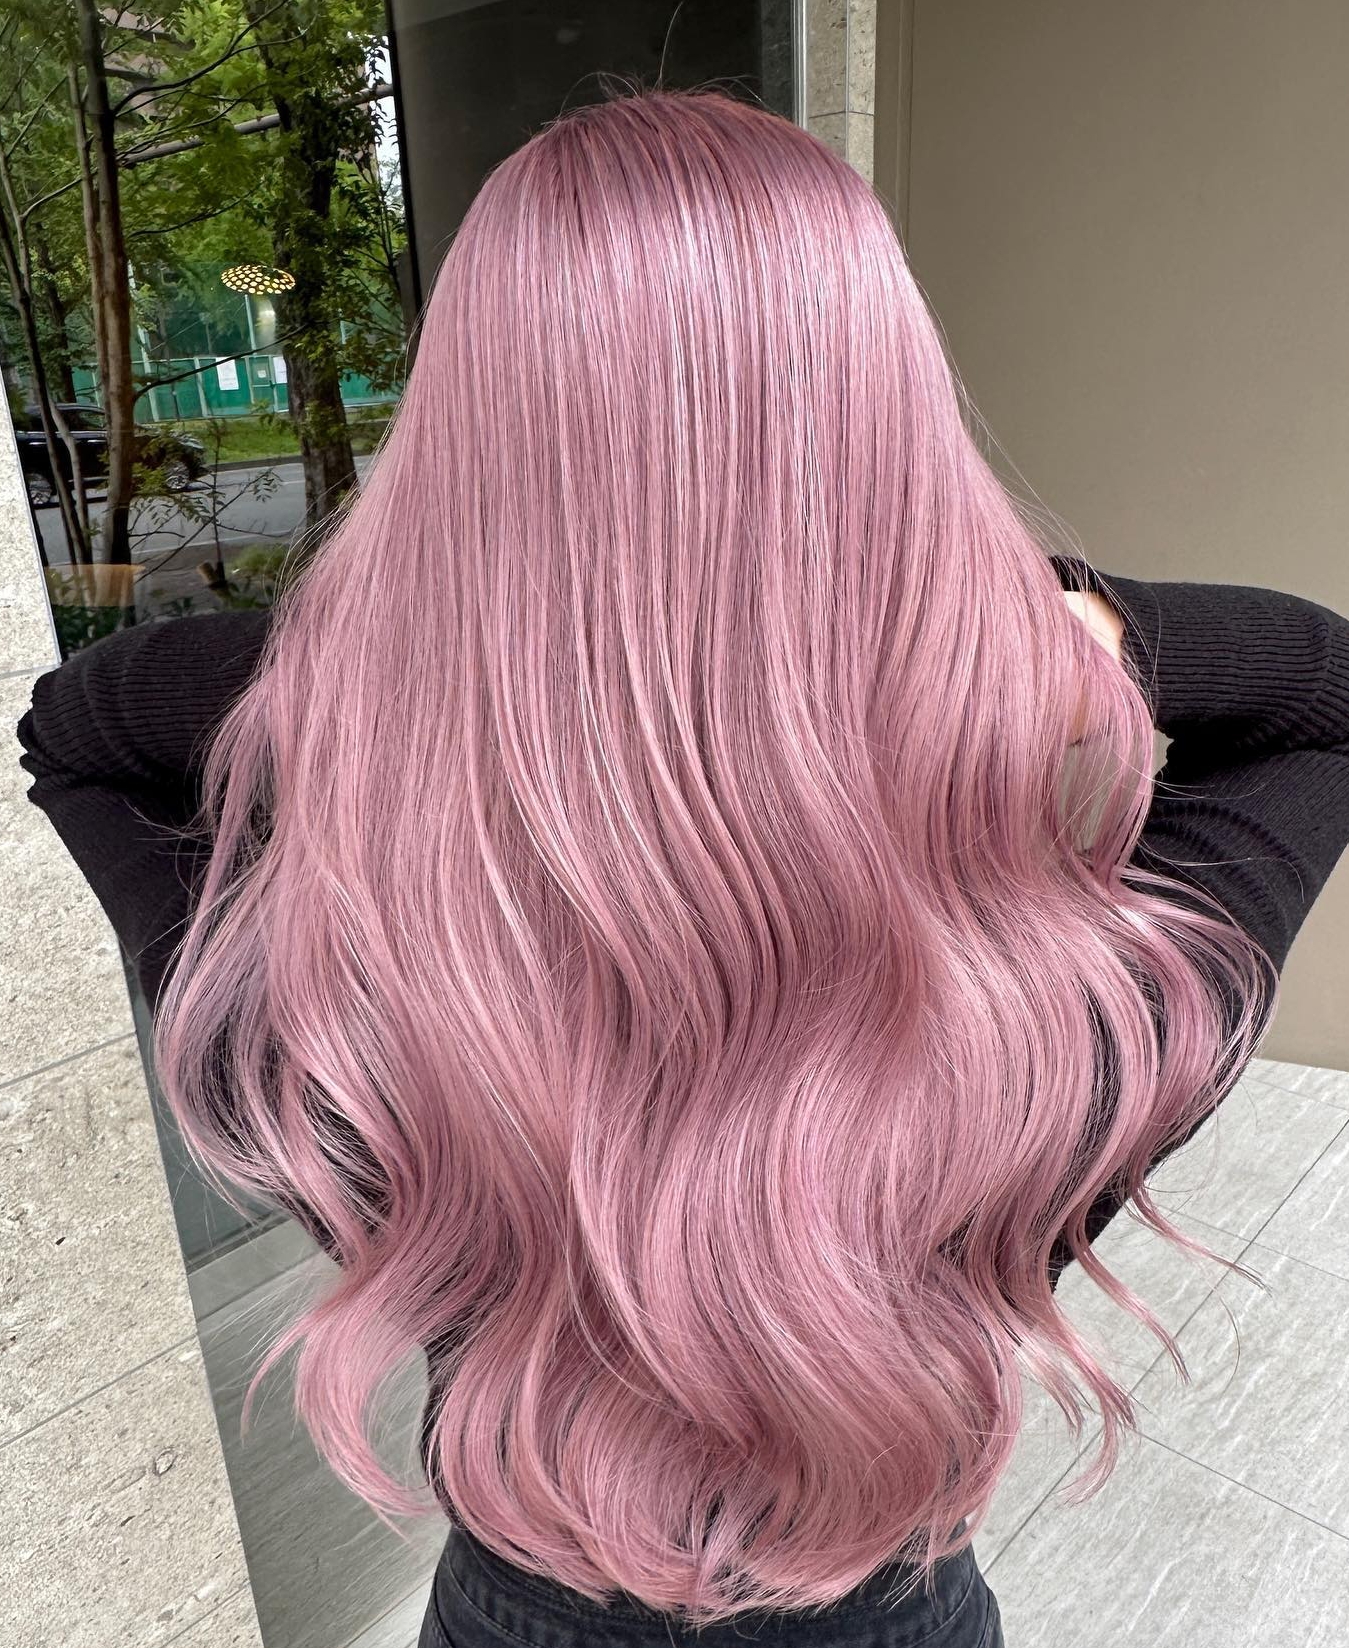 Icy Pink Color on Long Straight Hair